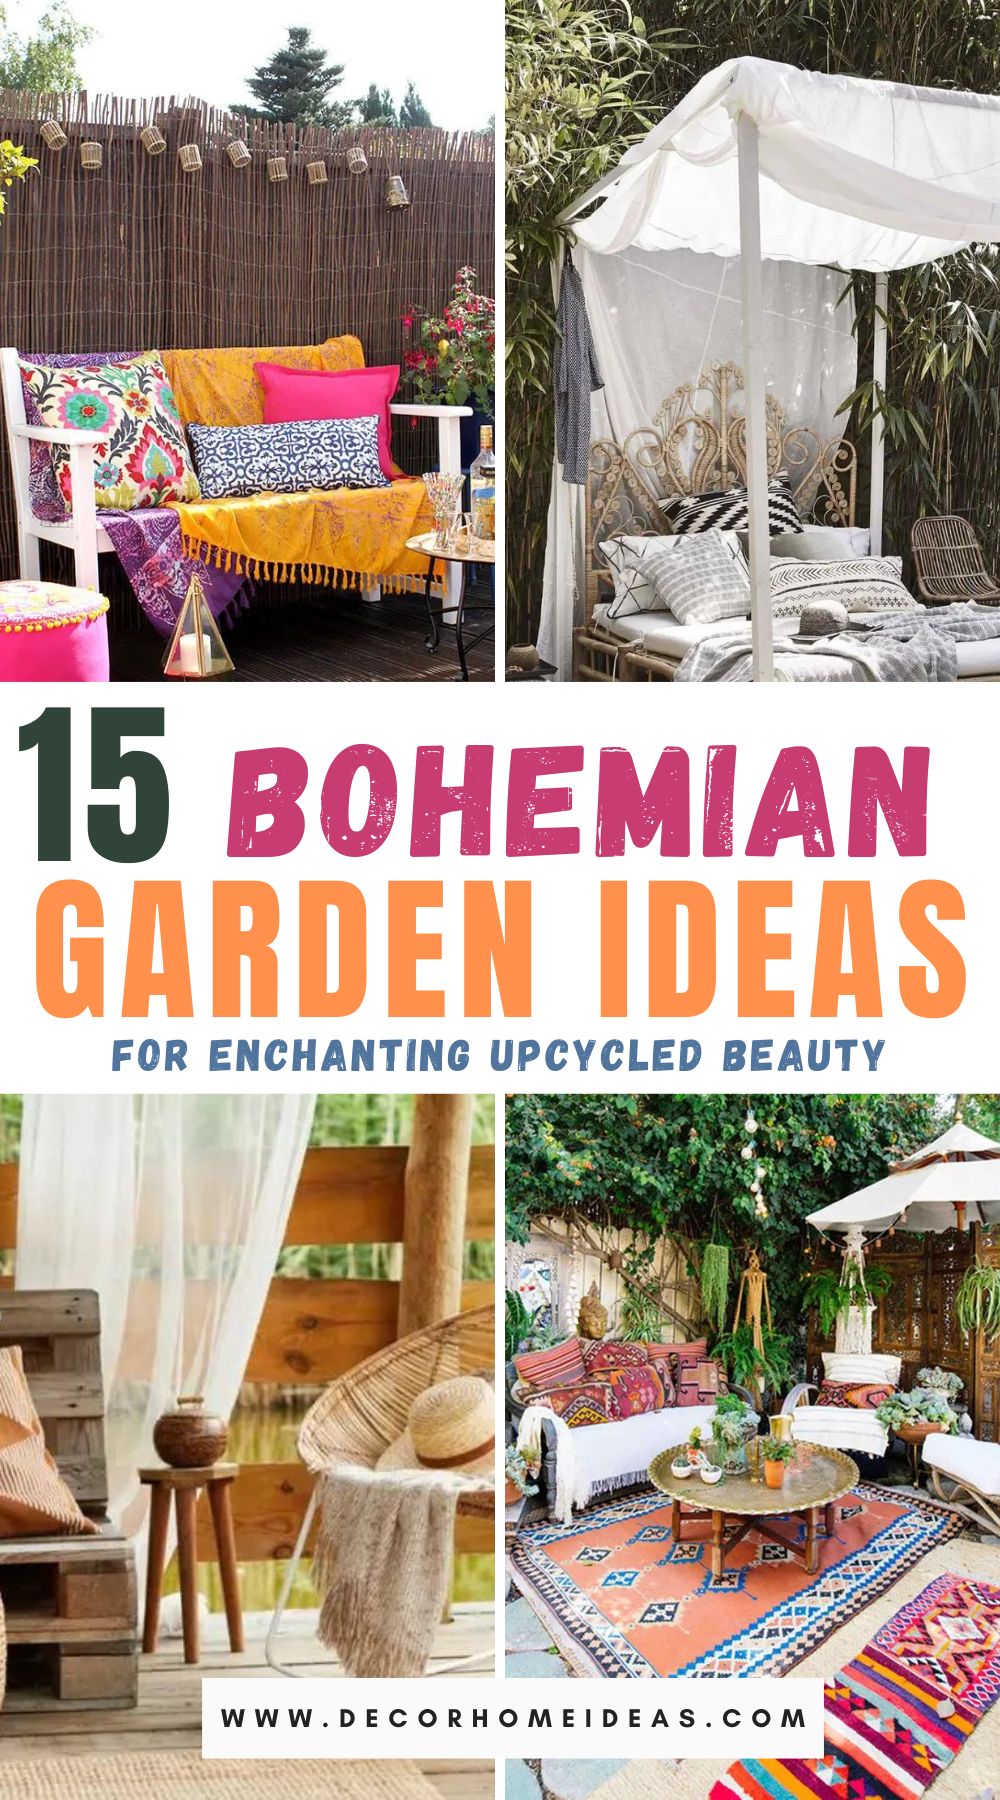 Get creative with your garden and check out these 15 upcycled bohemian garden ideas for a unique and beautiful outdoor space!